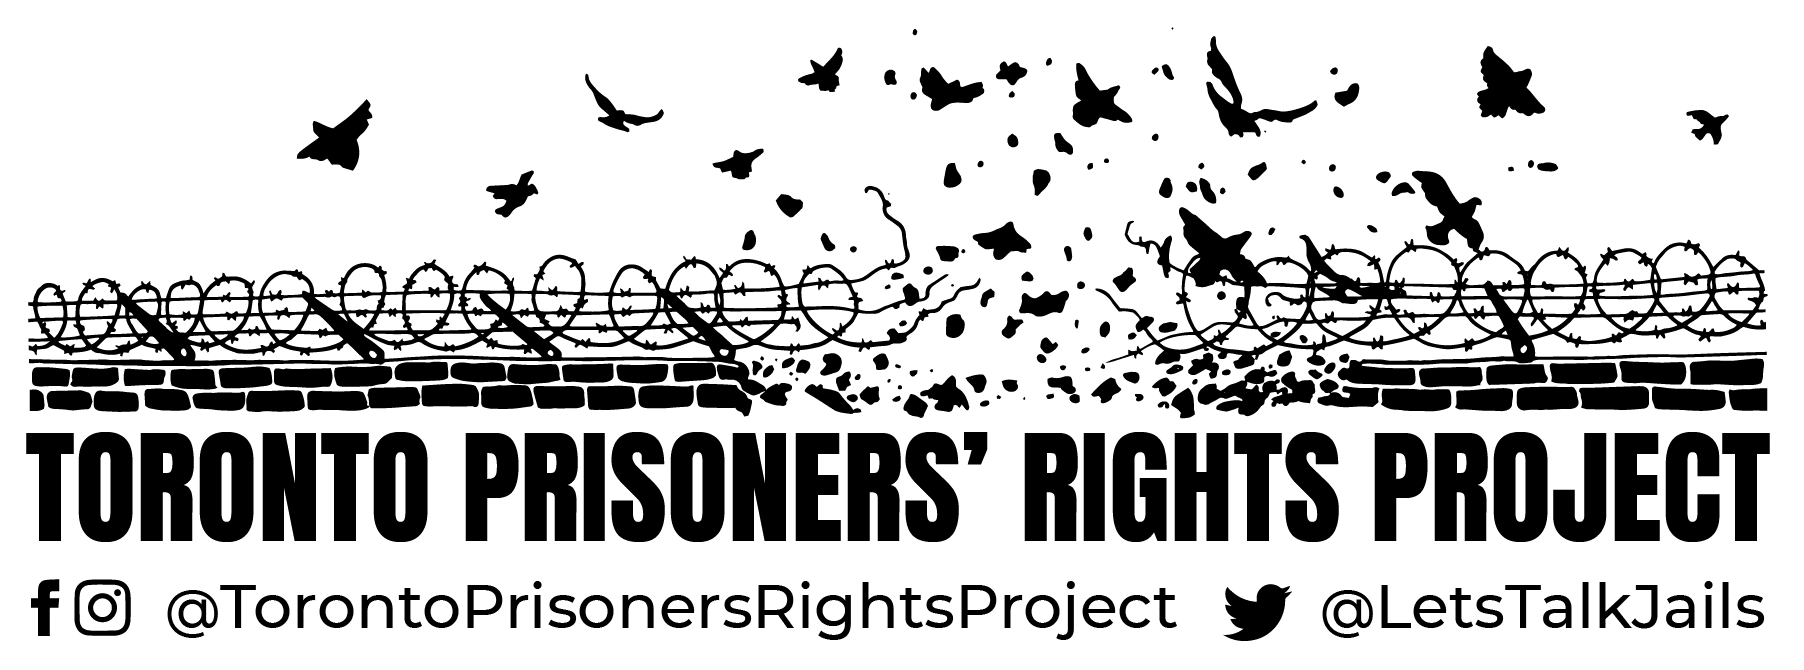 Black and white logo for Toronto Prisoners' Rights Project